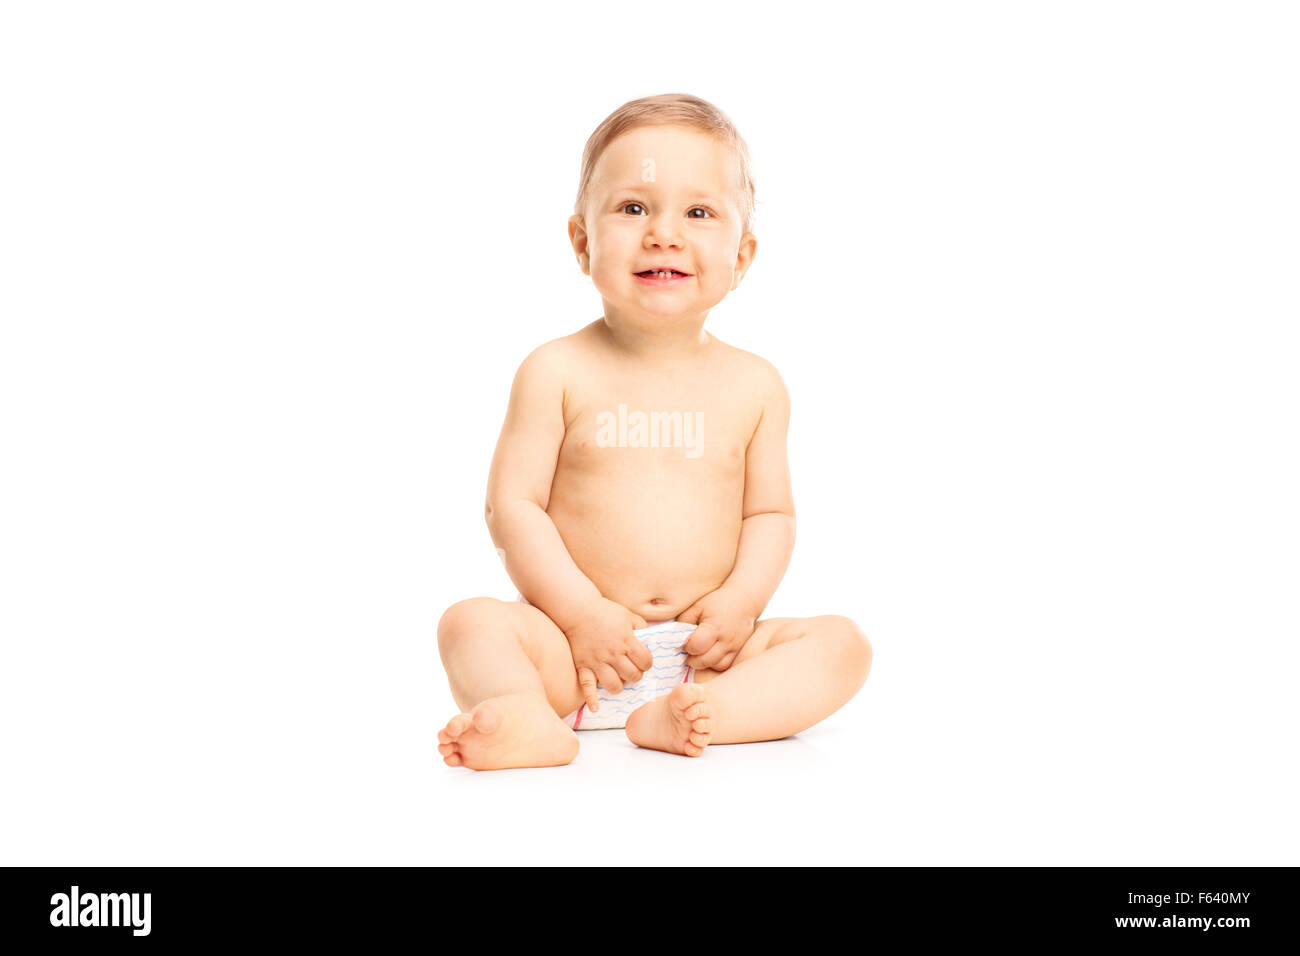 Studio shot of an adorable little baby girl in white diapers smiling and looking up isolated on white background Stock Photo